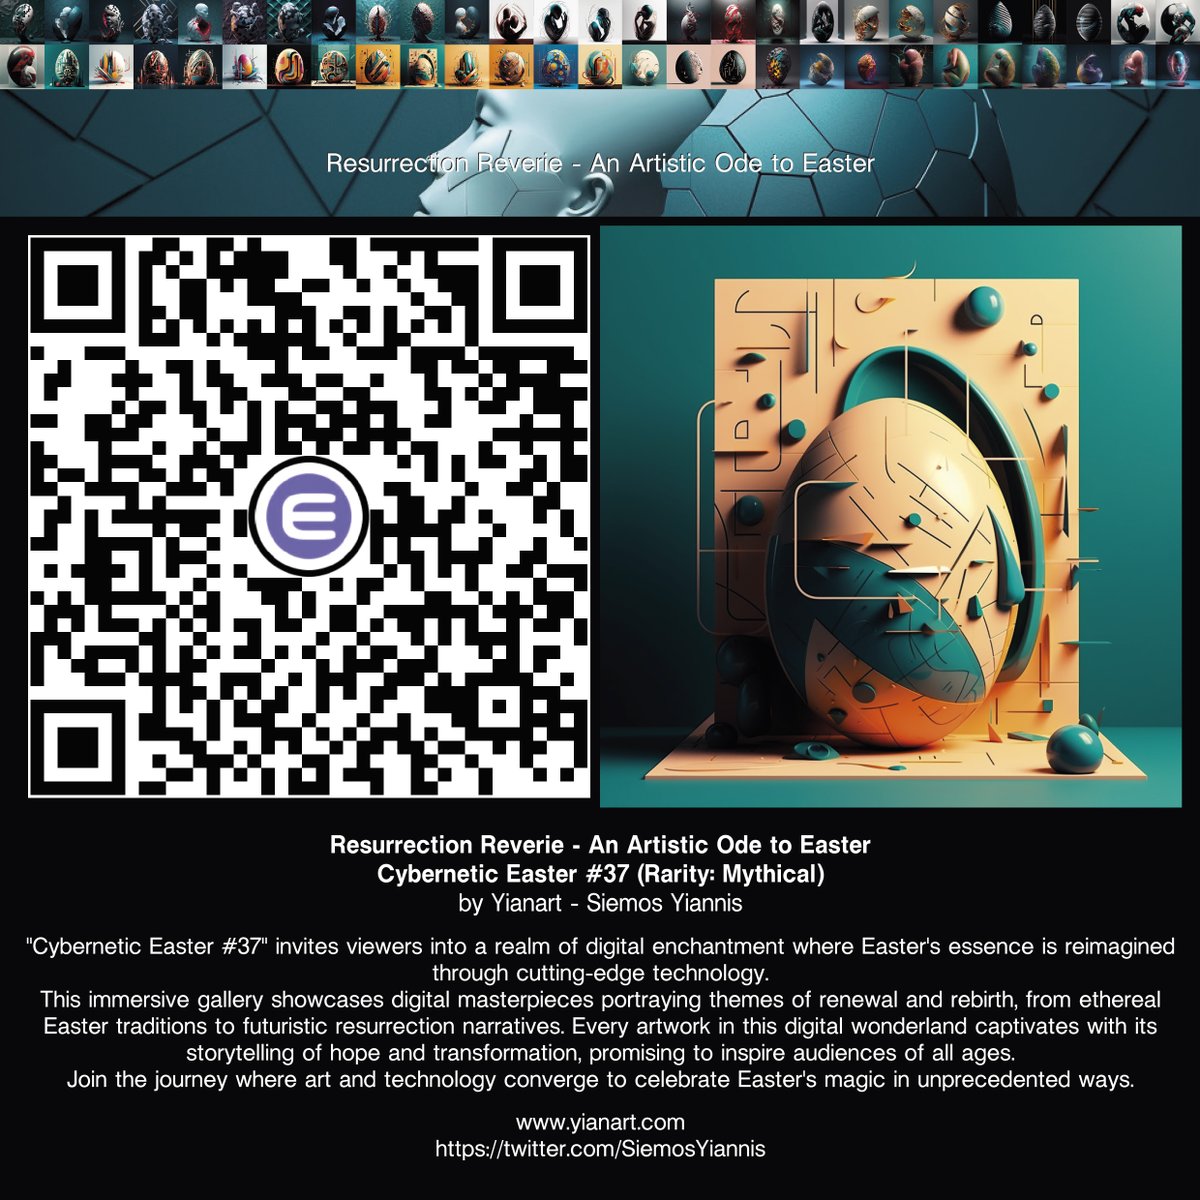 Resurrection Reverie - An Artistic Ode to Easter
Cybernetic Easter #37 (Rarity: Mythical)🥚

Claim Now!
nft.io/beam/claim/180…

#nft #nftarts #nftartist #nftartists #nftartwork #nftartcollector #crypto #Cryptocurency #blockchain #digitalart #yianart #enjin #easter #FuelTheEnjin